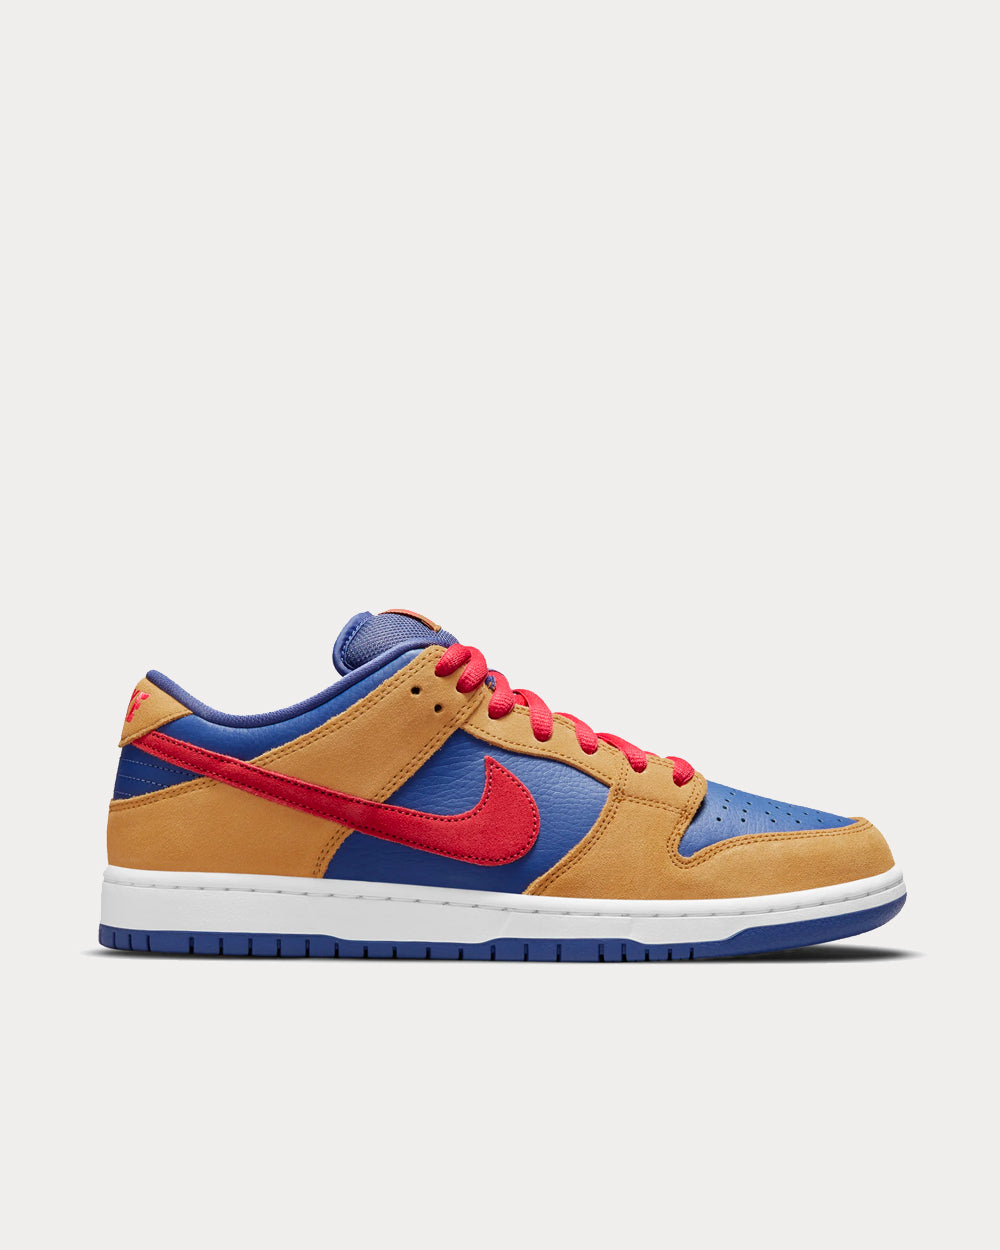 SB Dunk Low Pro Wheat / Red / Purple / White Low Top Sneakers